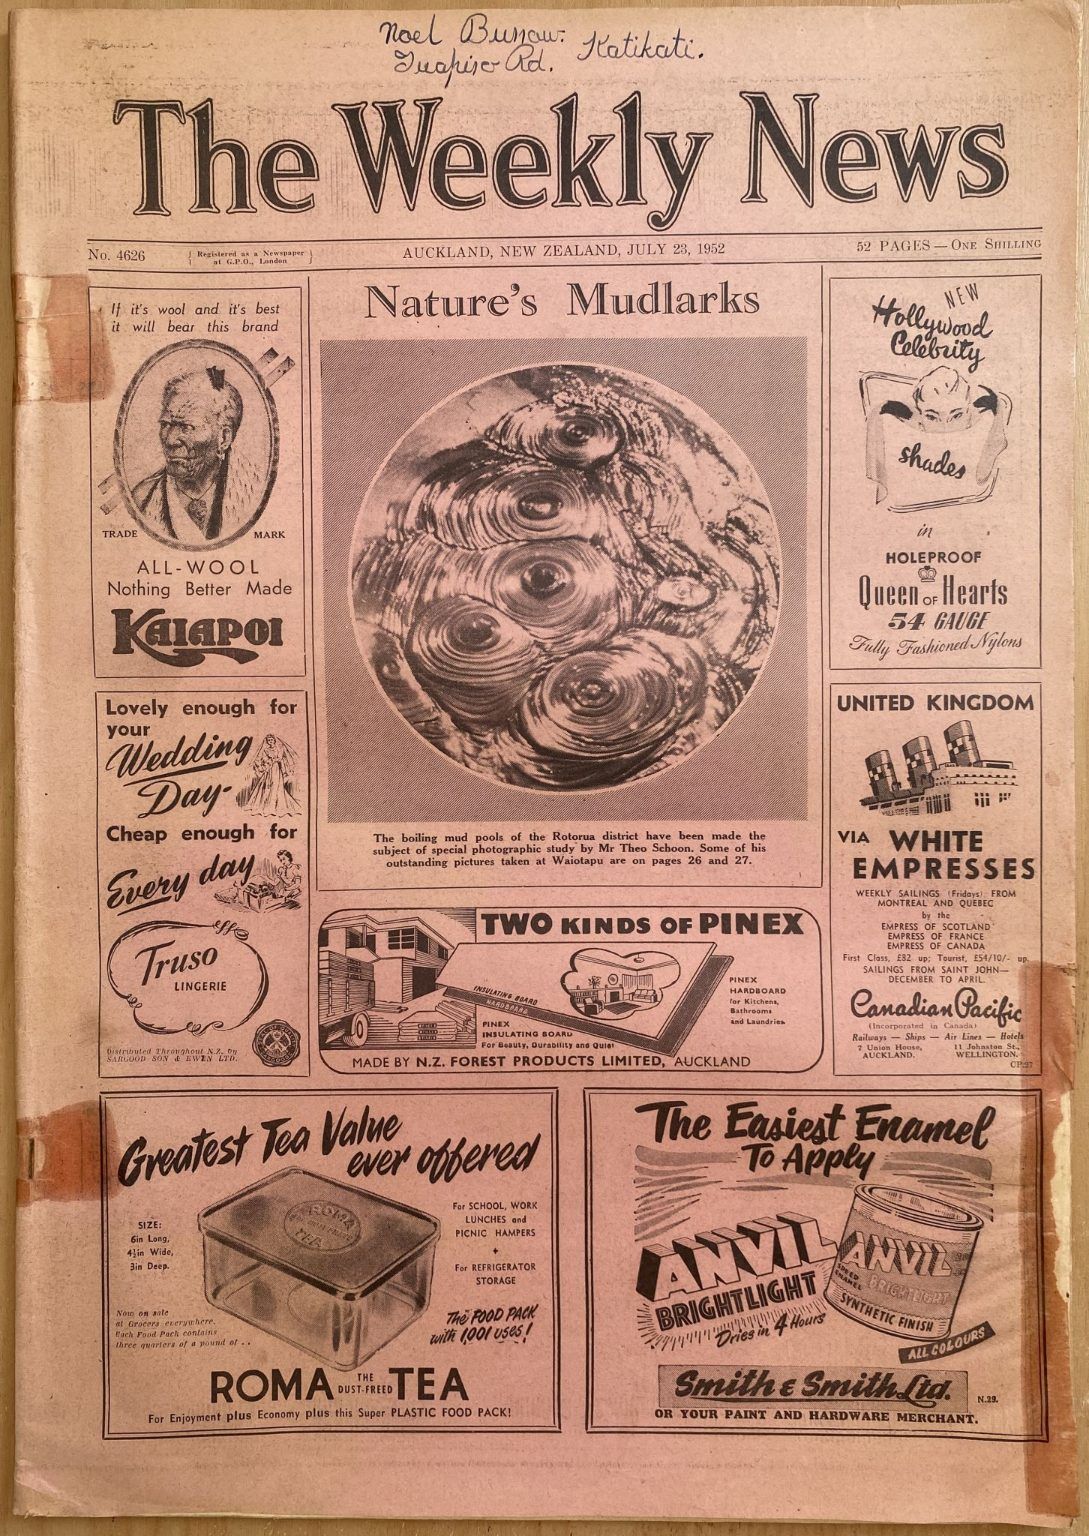 OLD NEWSPAPER: The Weekly News - No. 4626, 23 July 1952